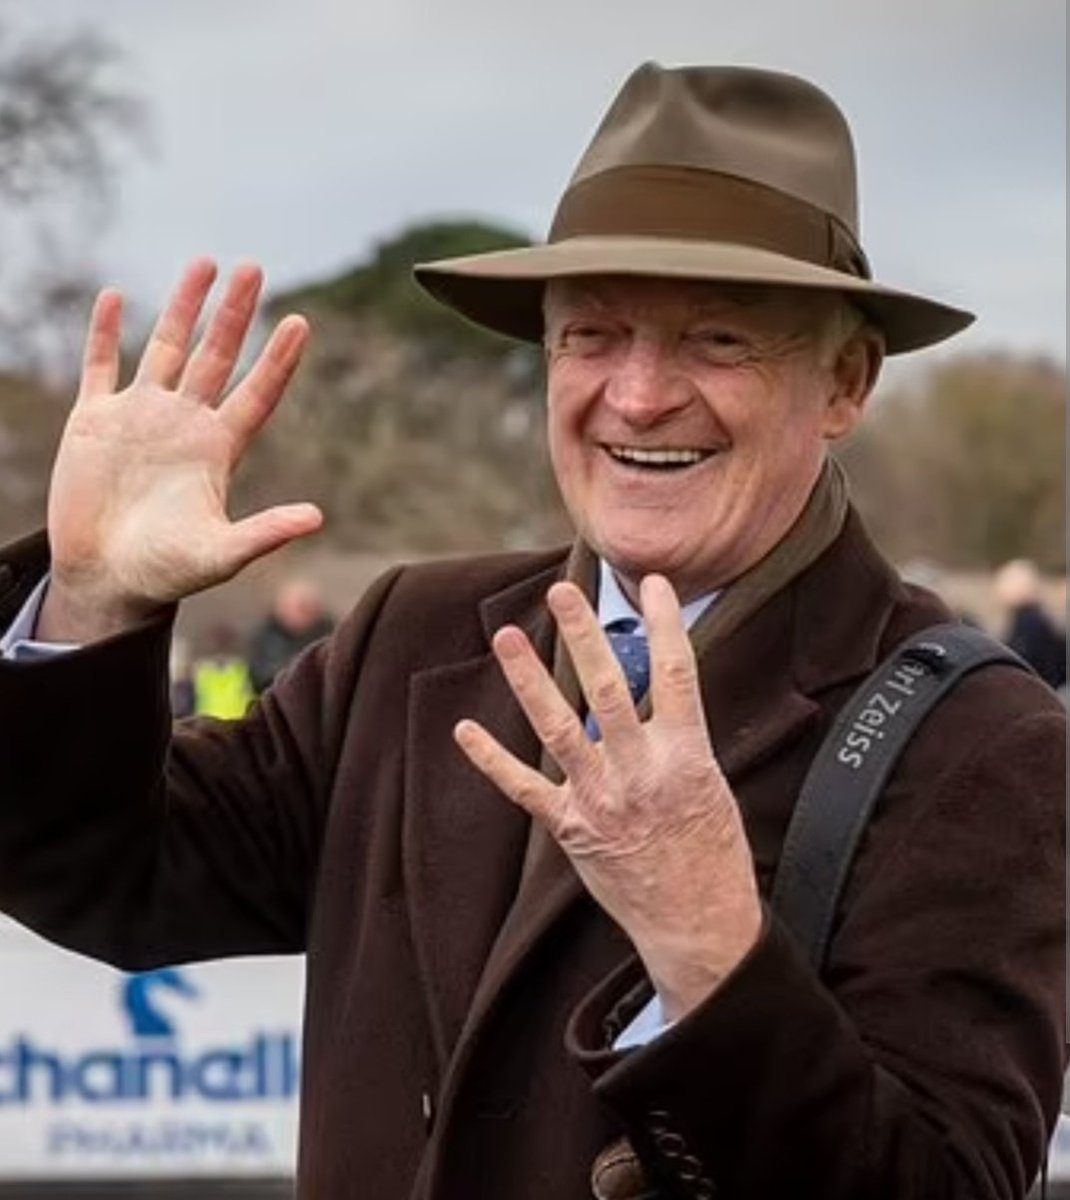 💷 If WILLIE MULLINS Has A Double at PERTH with INSTIT & LOUGHGLYNN for Townend today: 😍 🎁 I'll give £100 CASH to One of YOU Lucky People at 10pm tonight!! 💷 To Enter: 👇 1⃣ RT this Tweet 2⃣ Follow @racingblogger 📸 instagram.com/racingblogger #EarthDay #Win #Perth #Ireland